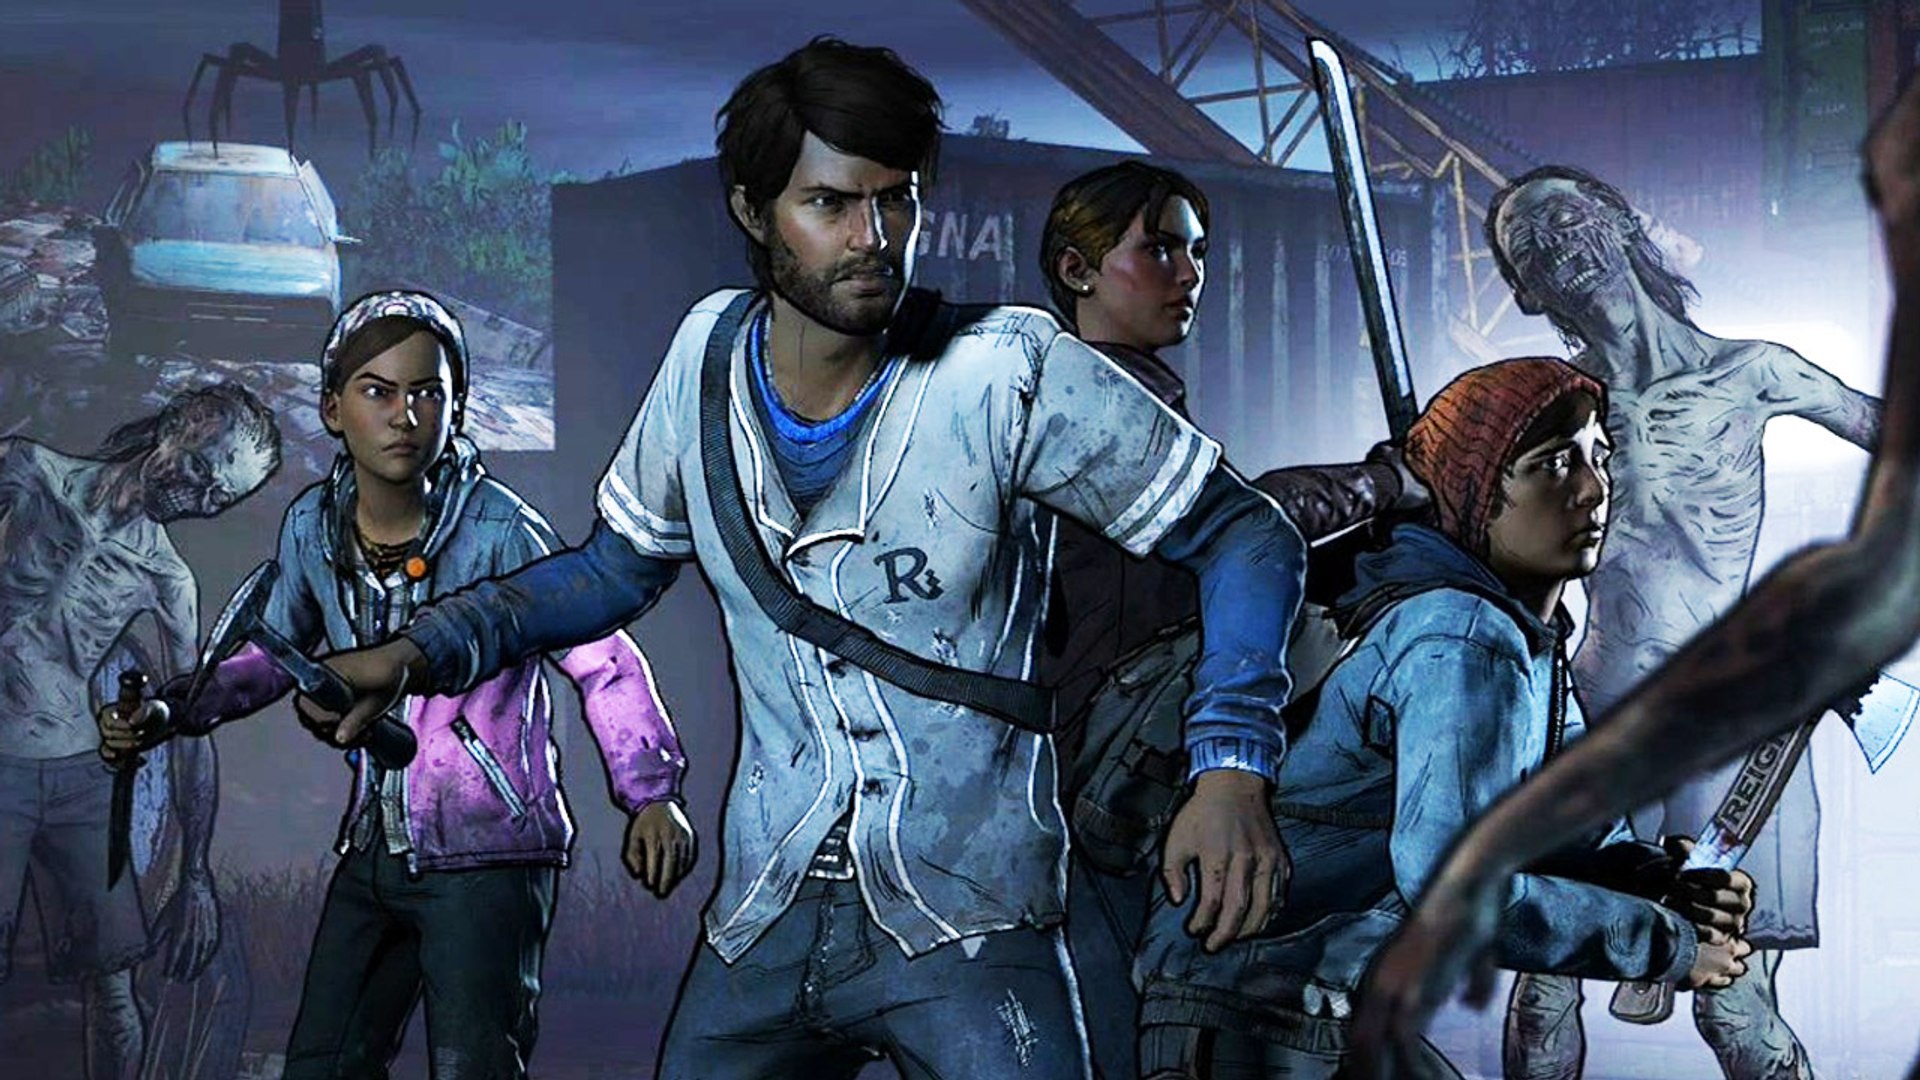 TWD A New Frontier. The Walking Dead: a New Frontier - Episode 1. The Walking Dead Нью Фронтир. Ходячие the New Frontier.